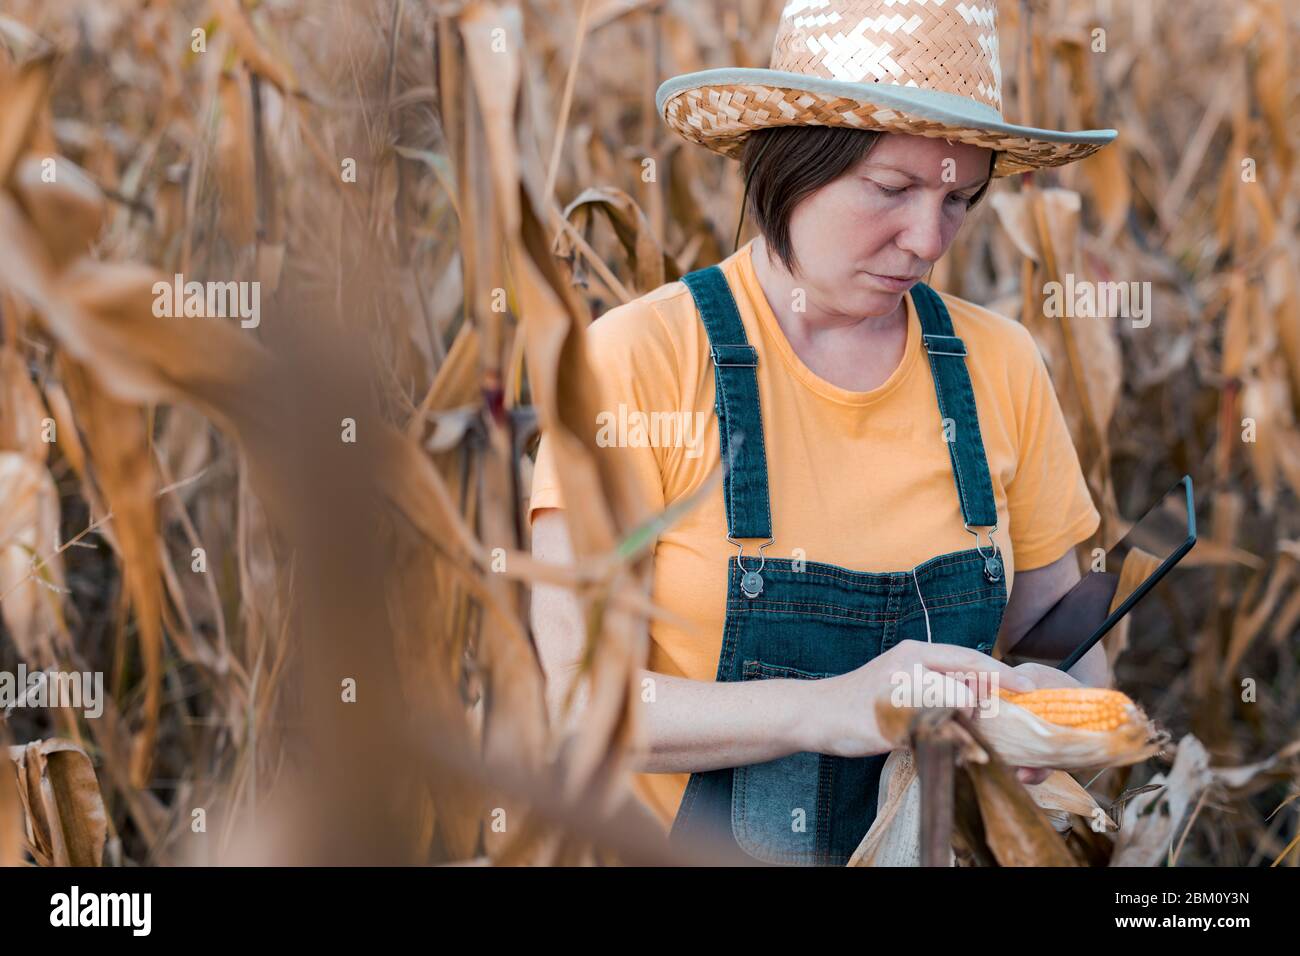 Female corn farmer using digital tablet in cornfield, smart farming concept  with woman farm worker wearing straw hat and jeans bib overalls Stock Photo  - Alamy